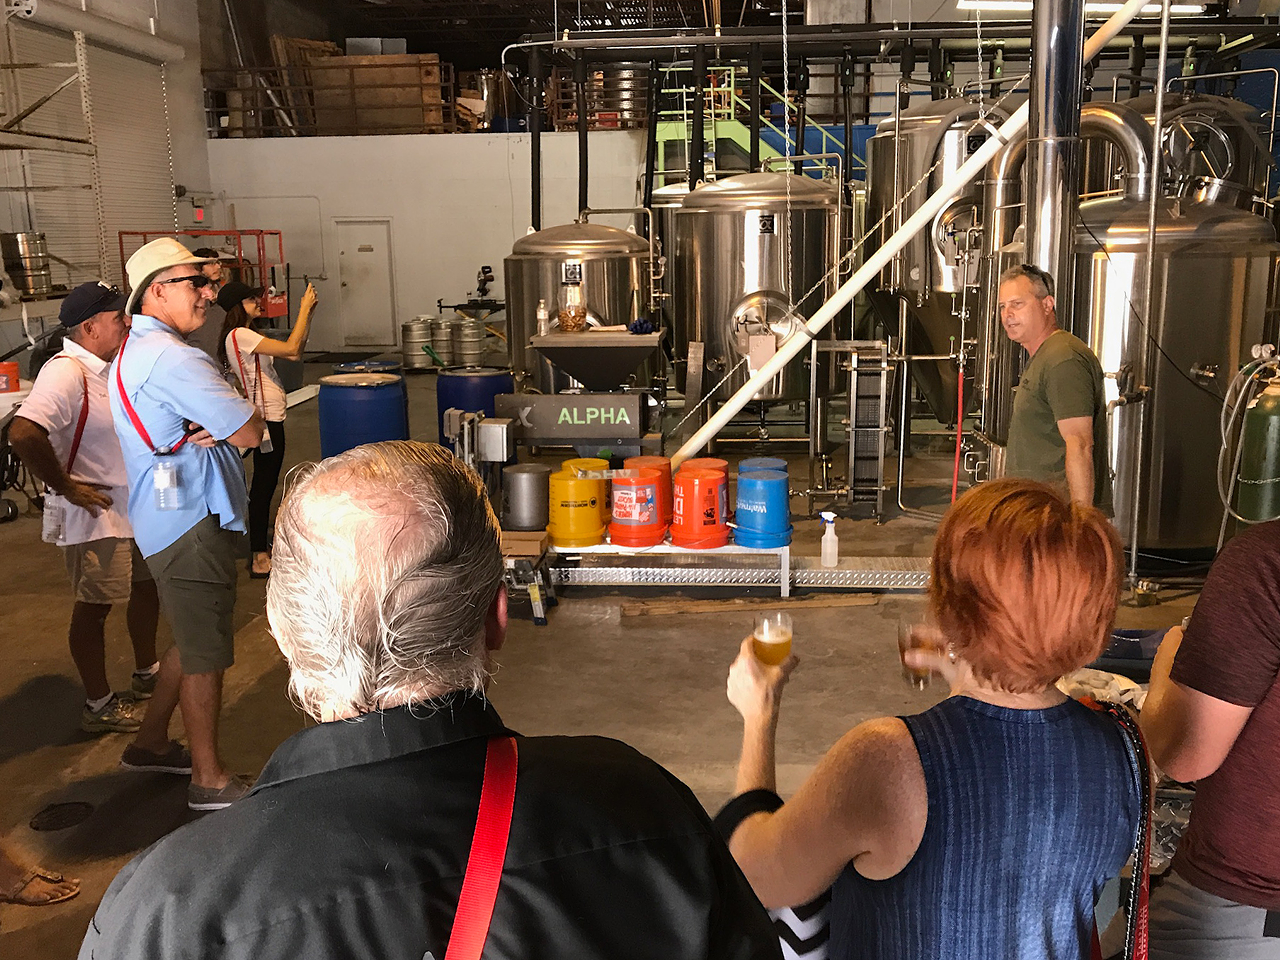 We're even treated to a quick tour of the brewery's 30-barrel system.